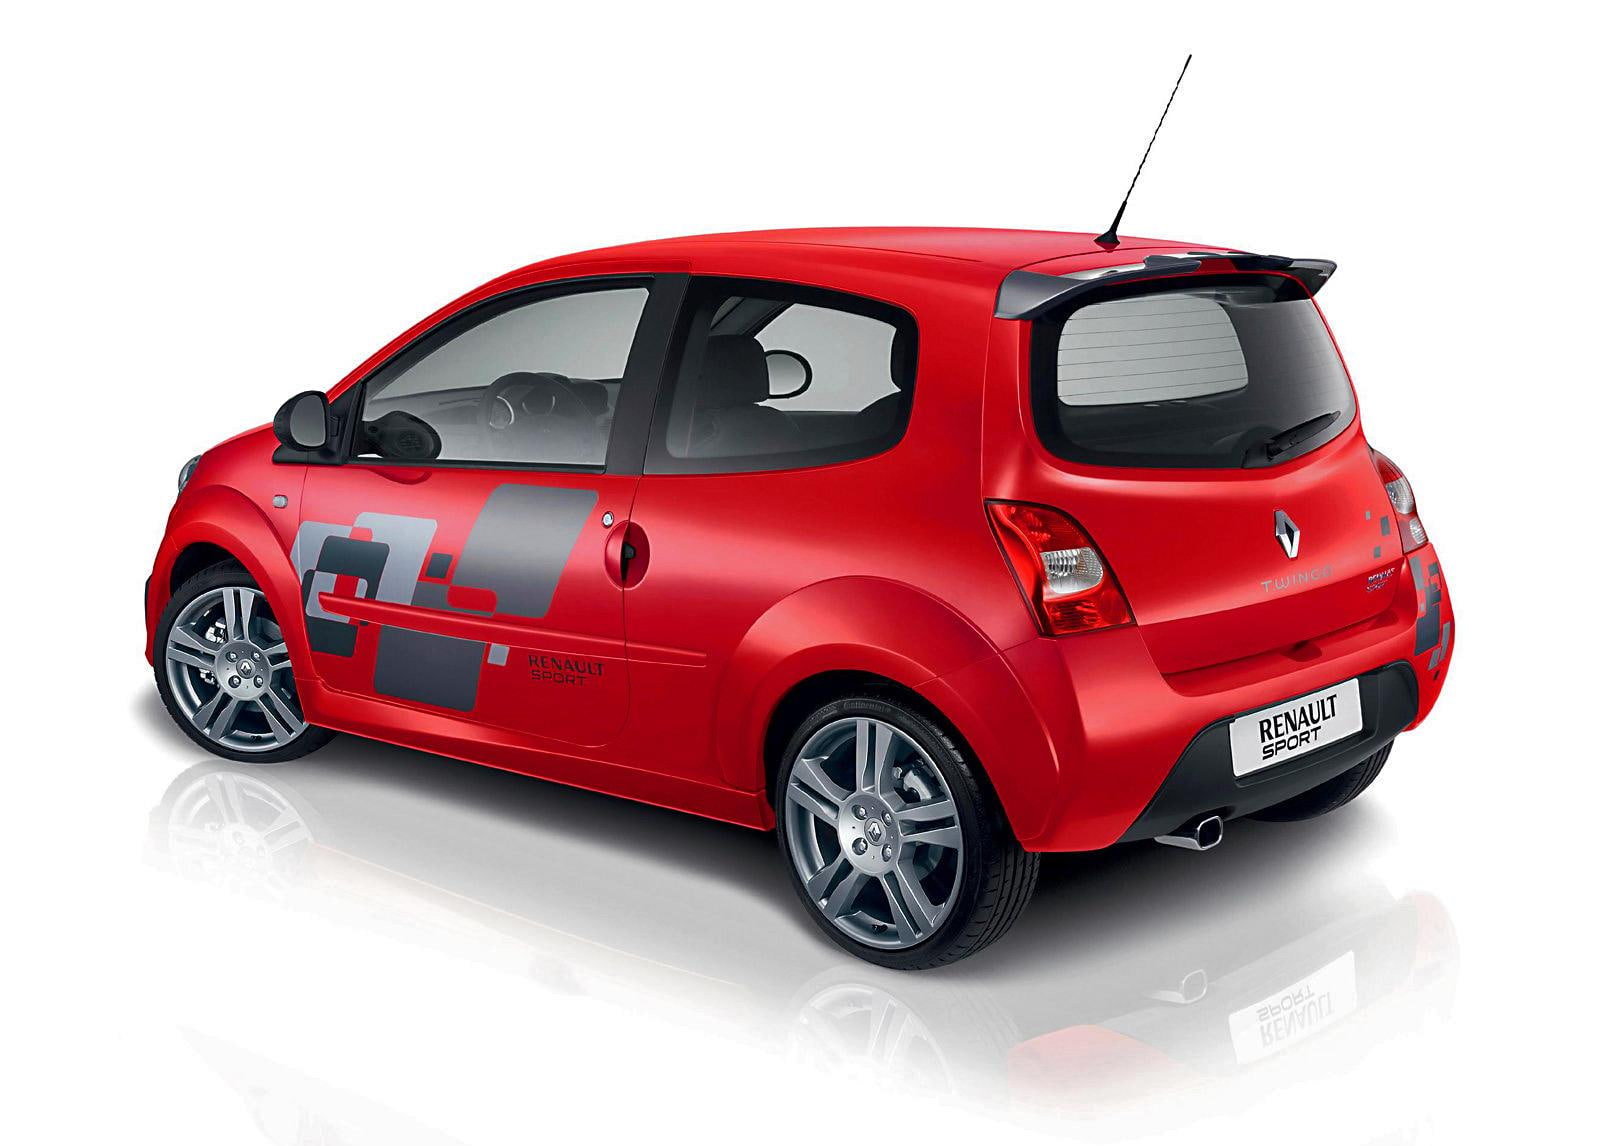 Renault Twingo RS, renault, car, mode of transportation, red